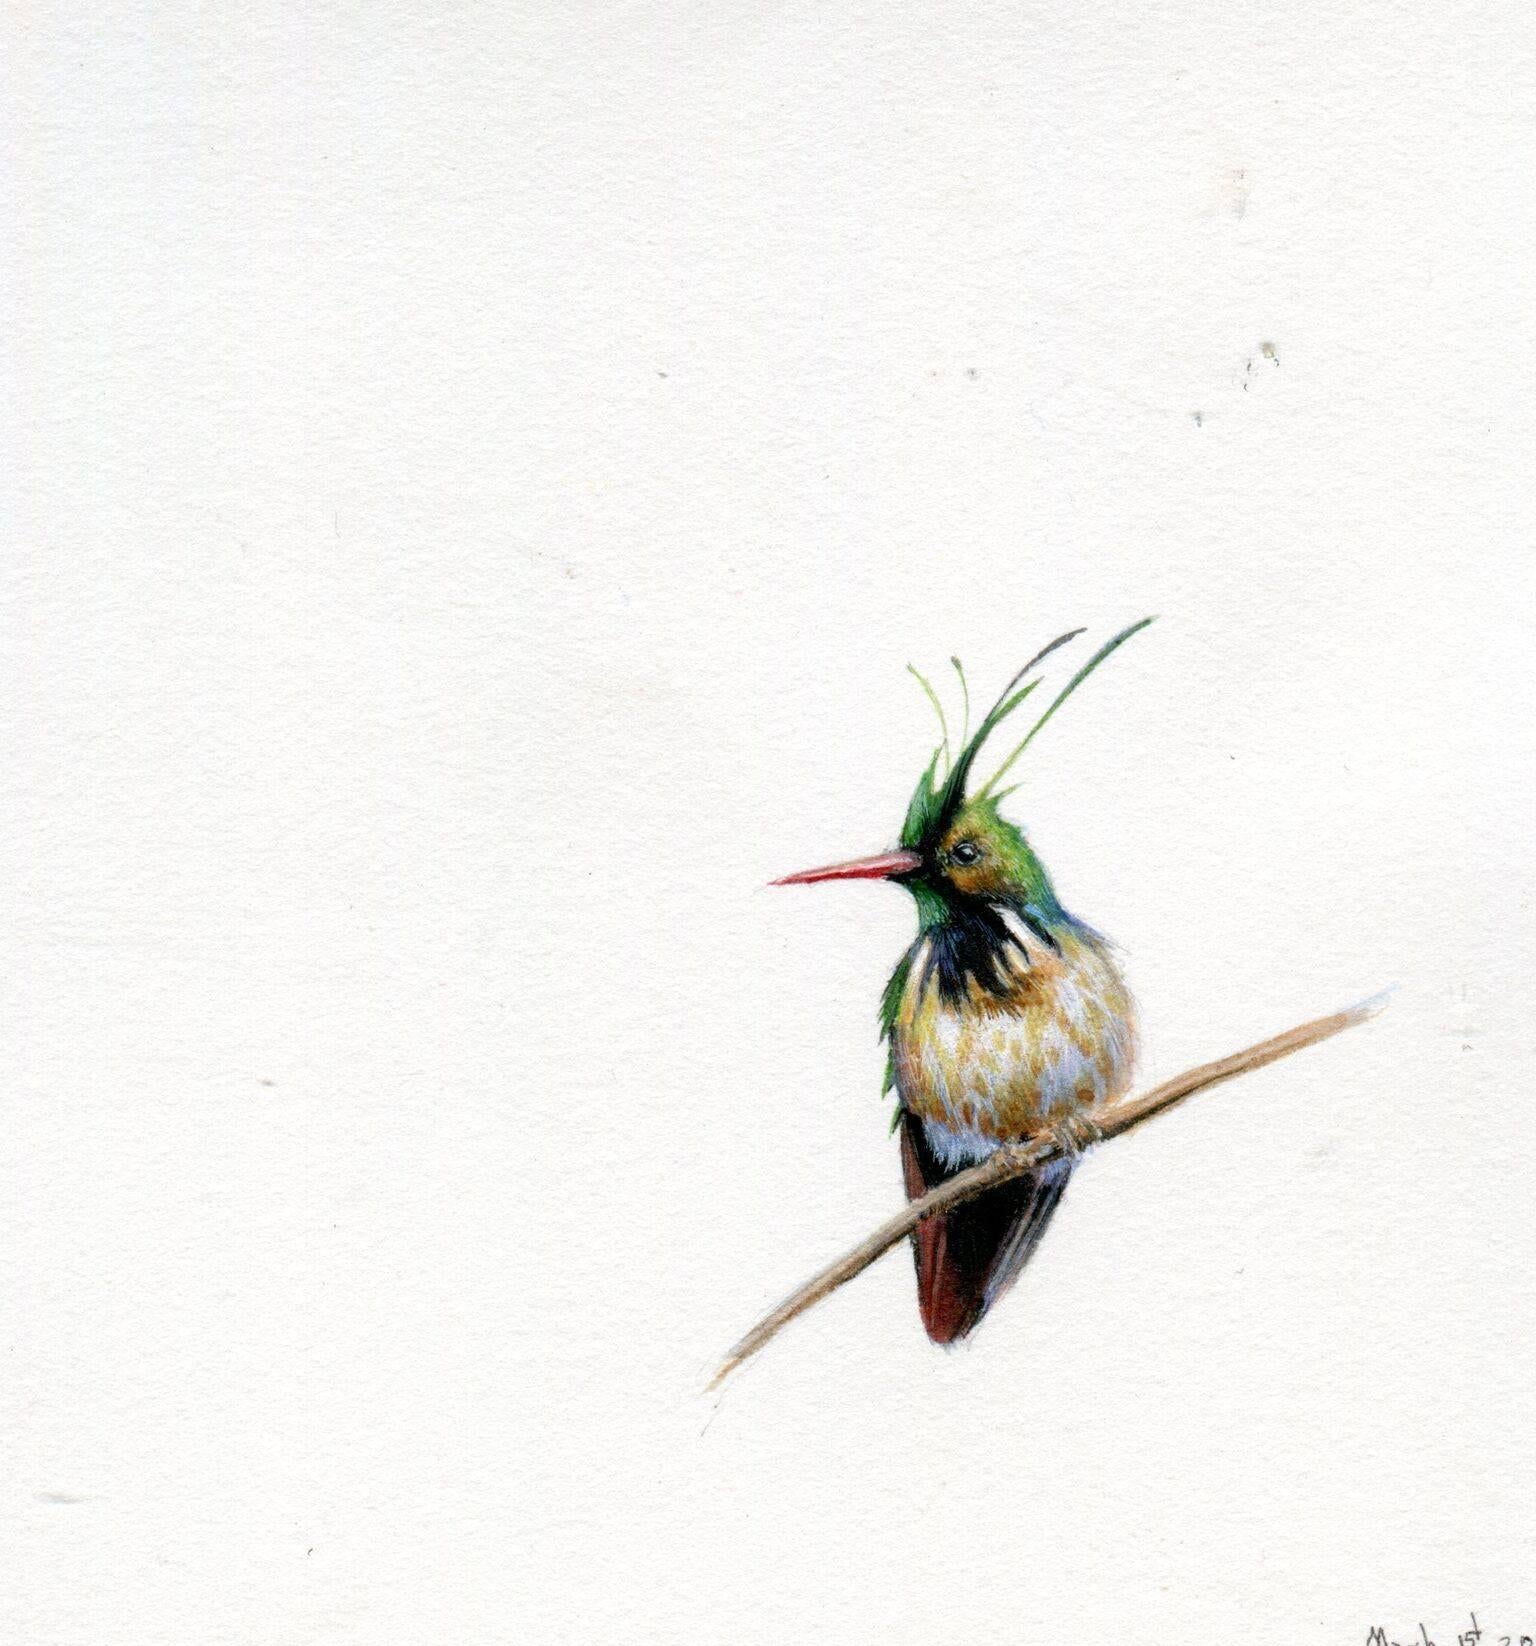 In the miniature Humming bird, Dina Brodsky makes regal the demure bird with vibrant blue, yellow, and green ink, gouache, and watercolor. Despite the scale of the miniature, the humming bird is monumentalized by its posture and the directness of